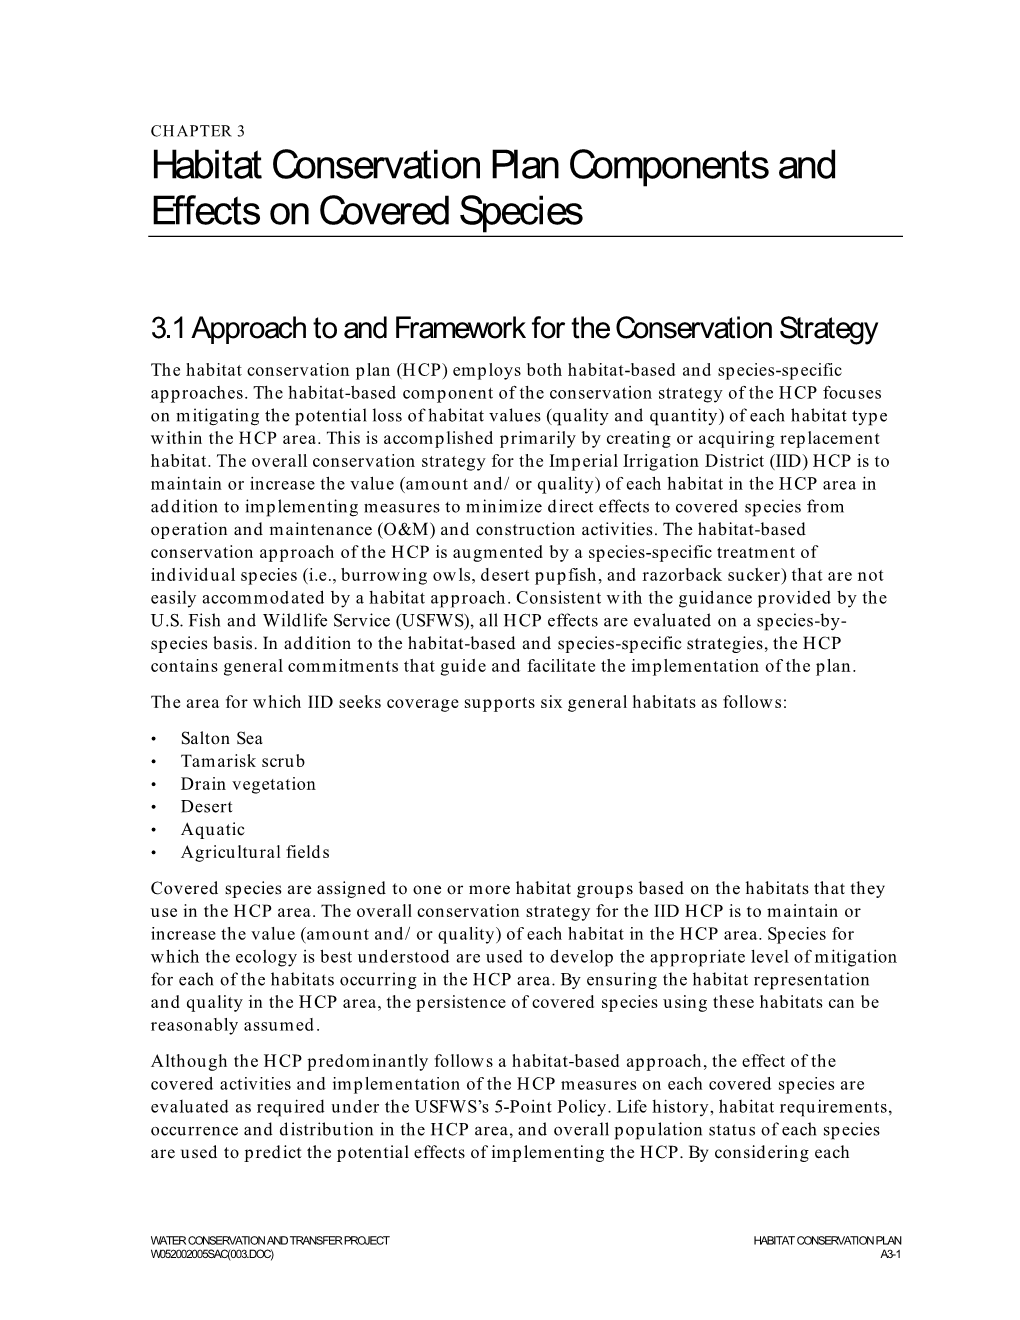 Habitat Conservation Plan Components and Effects on Covered Species